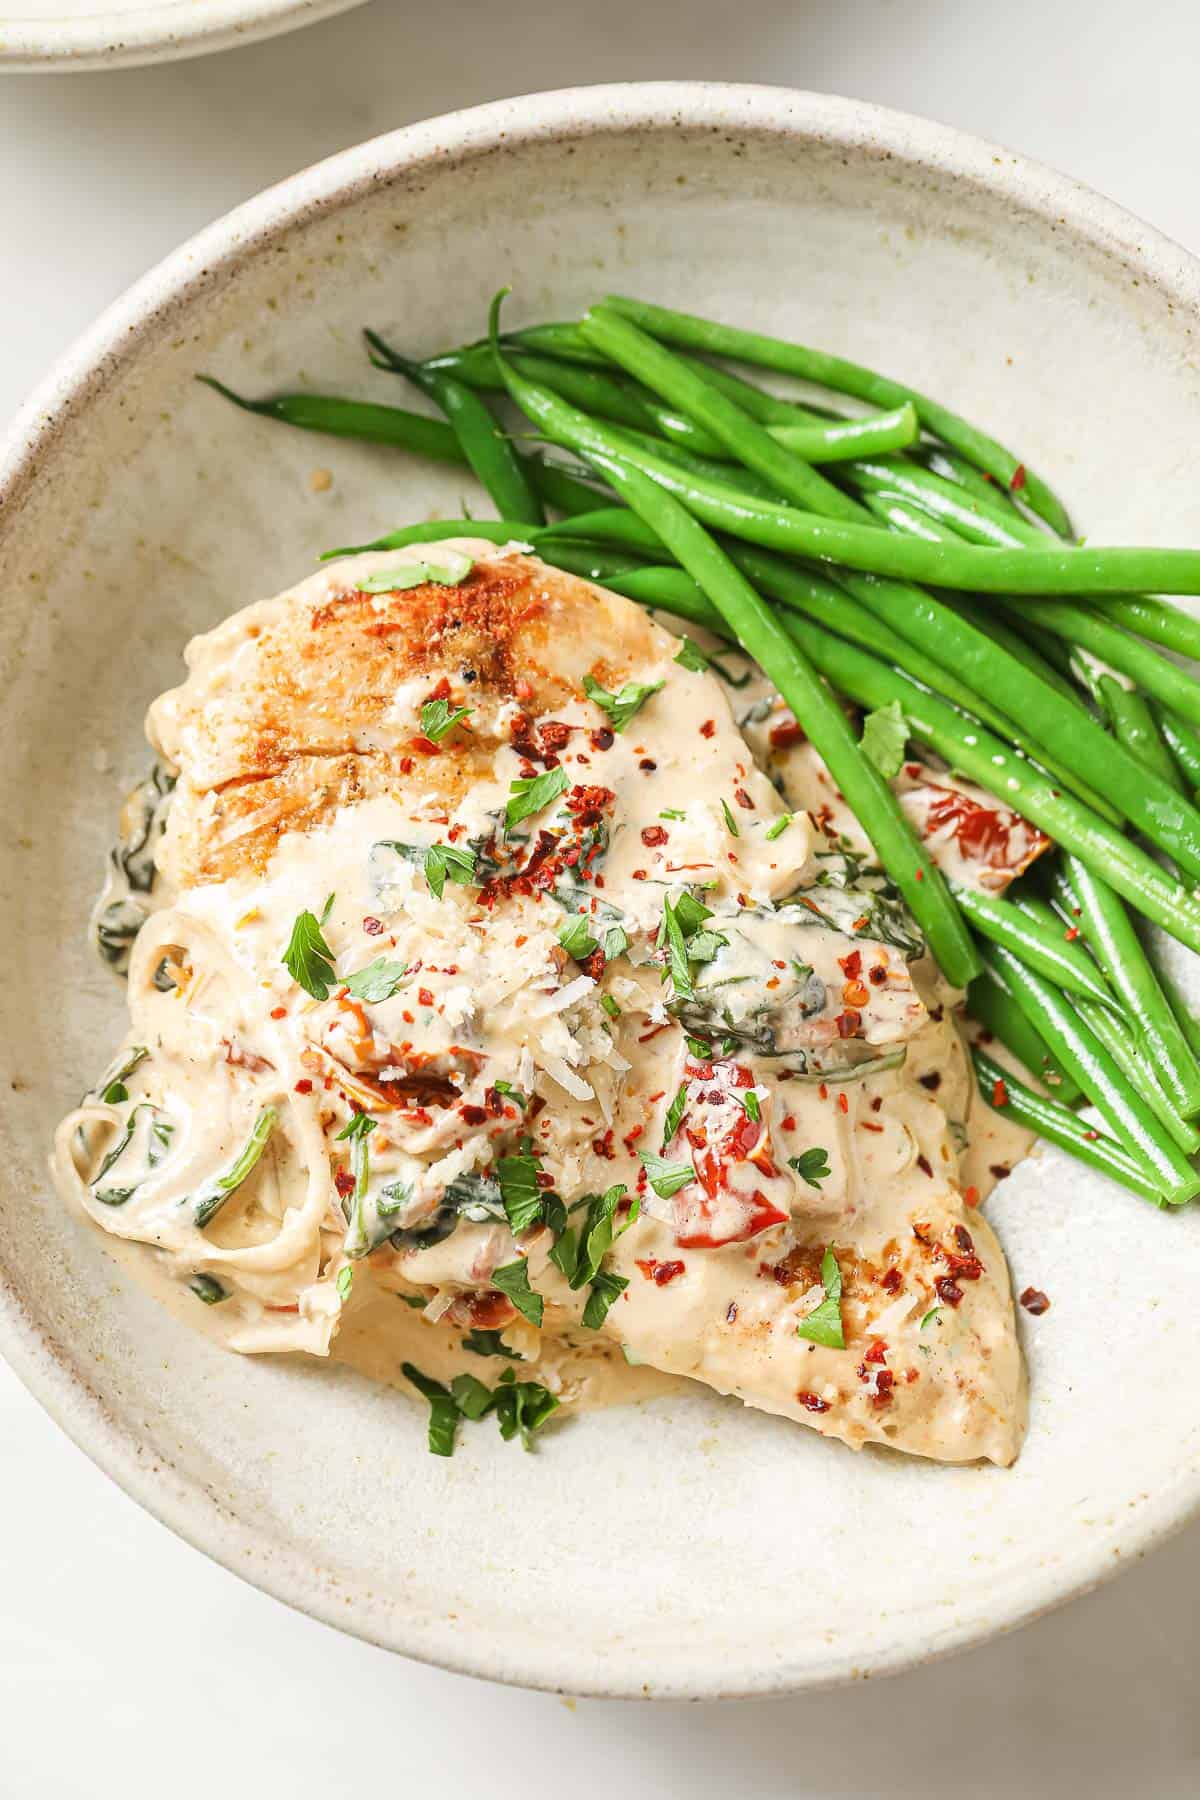 A white ceramic bowl with a chicken breast, topped with a sun-dried tomato cream sauce, with green beans on the side.